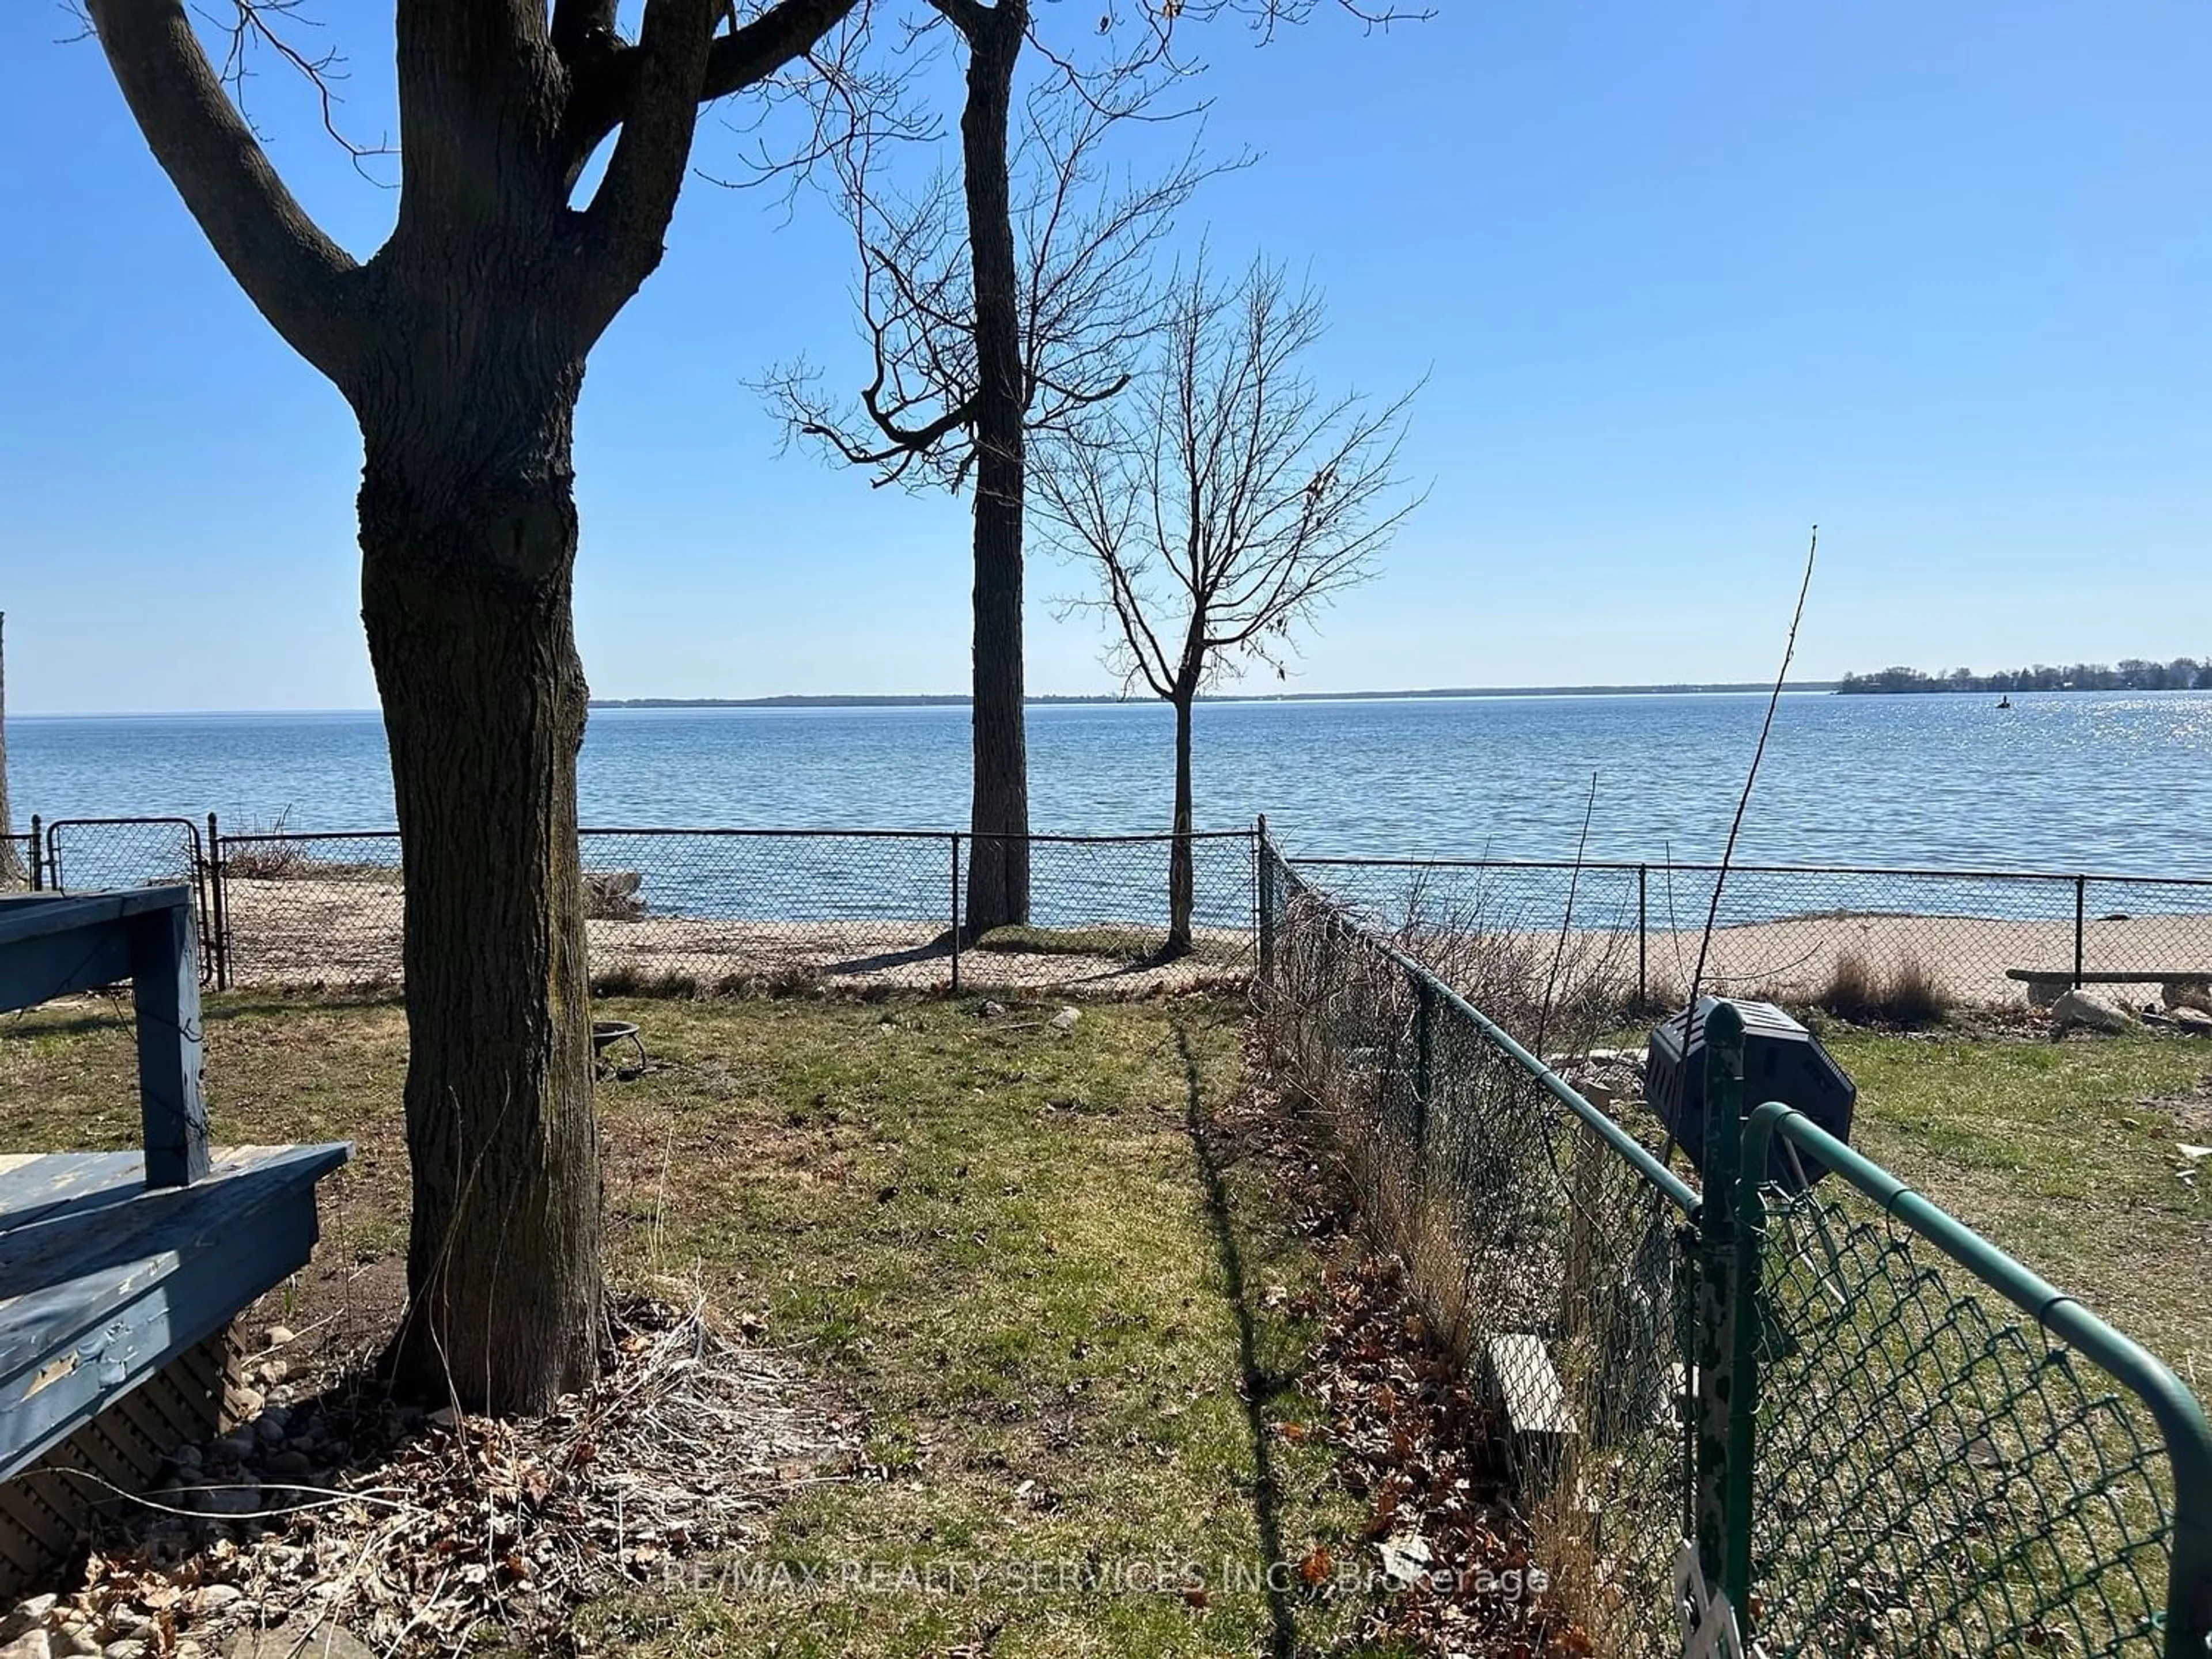 Lakeview for 907 Adams Rd, Innisfil Ontario L9S 4C9